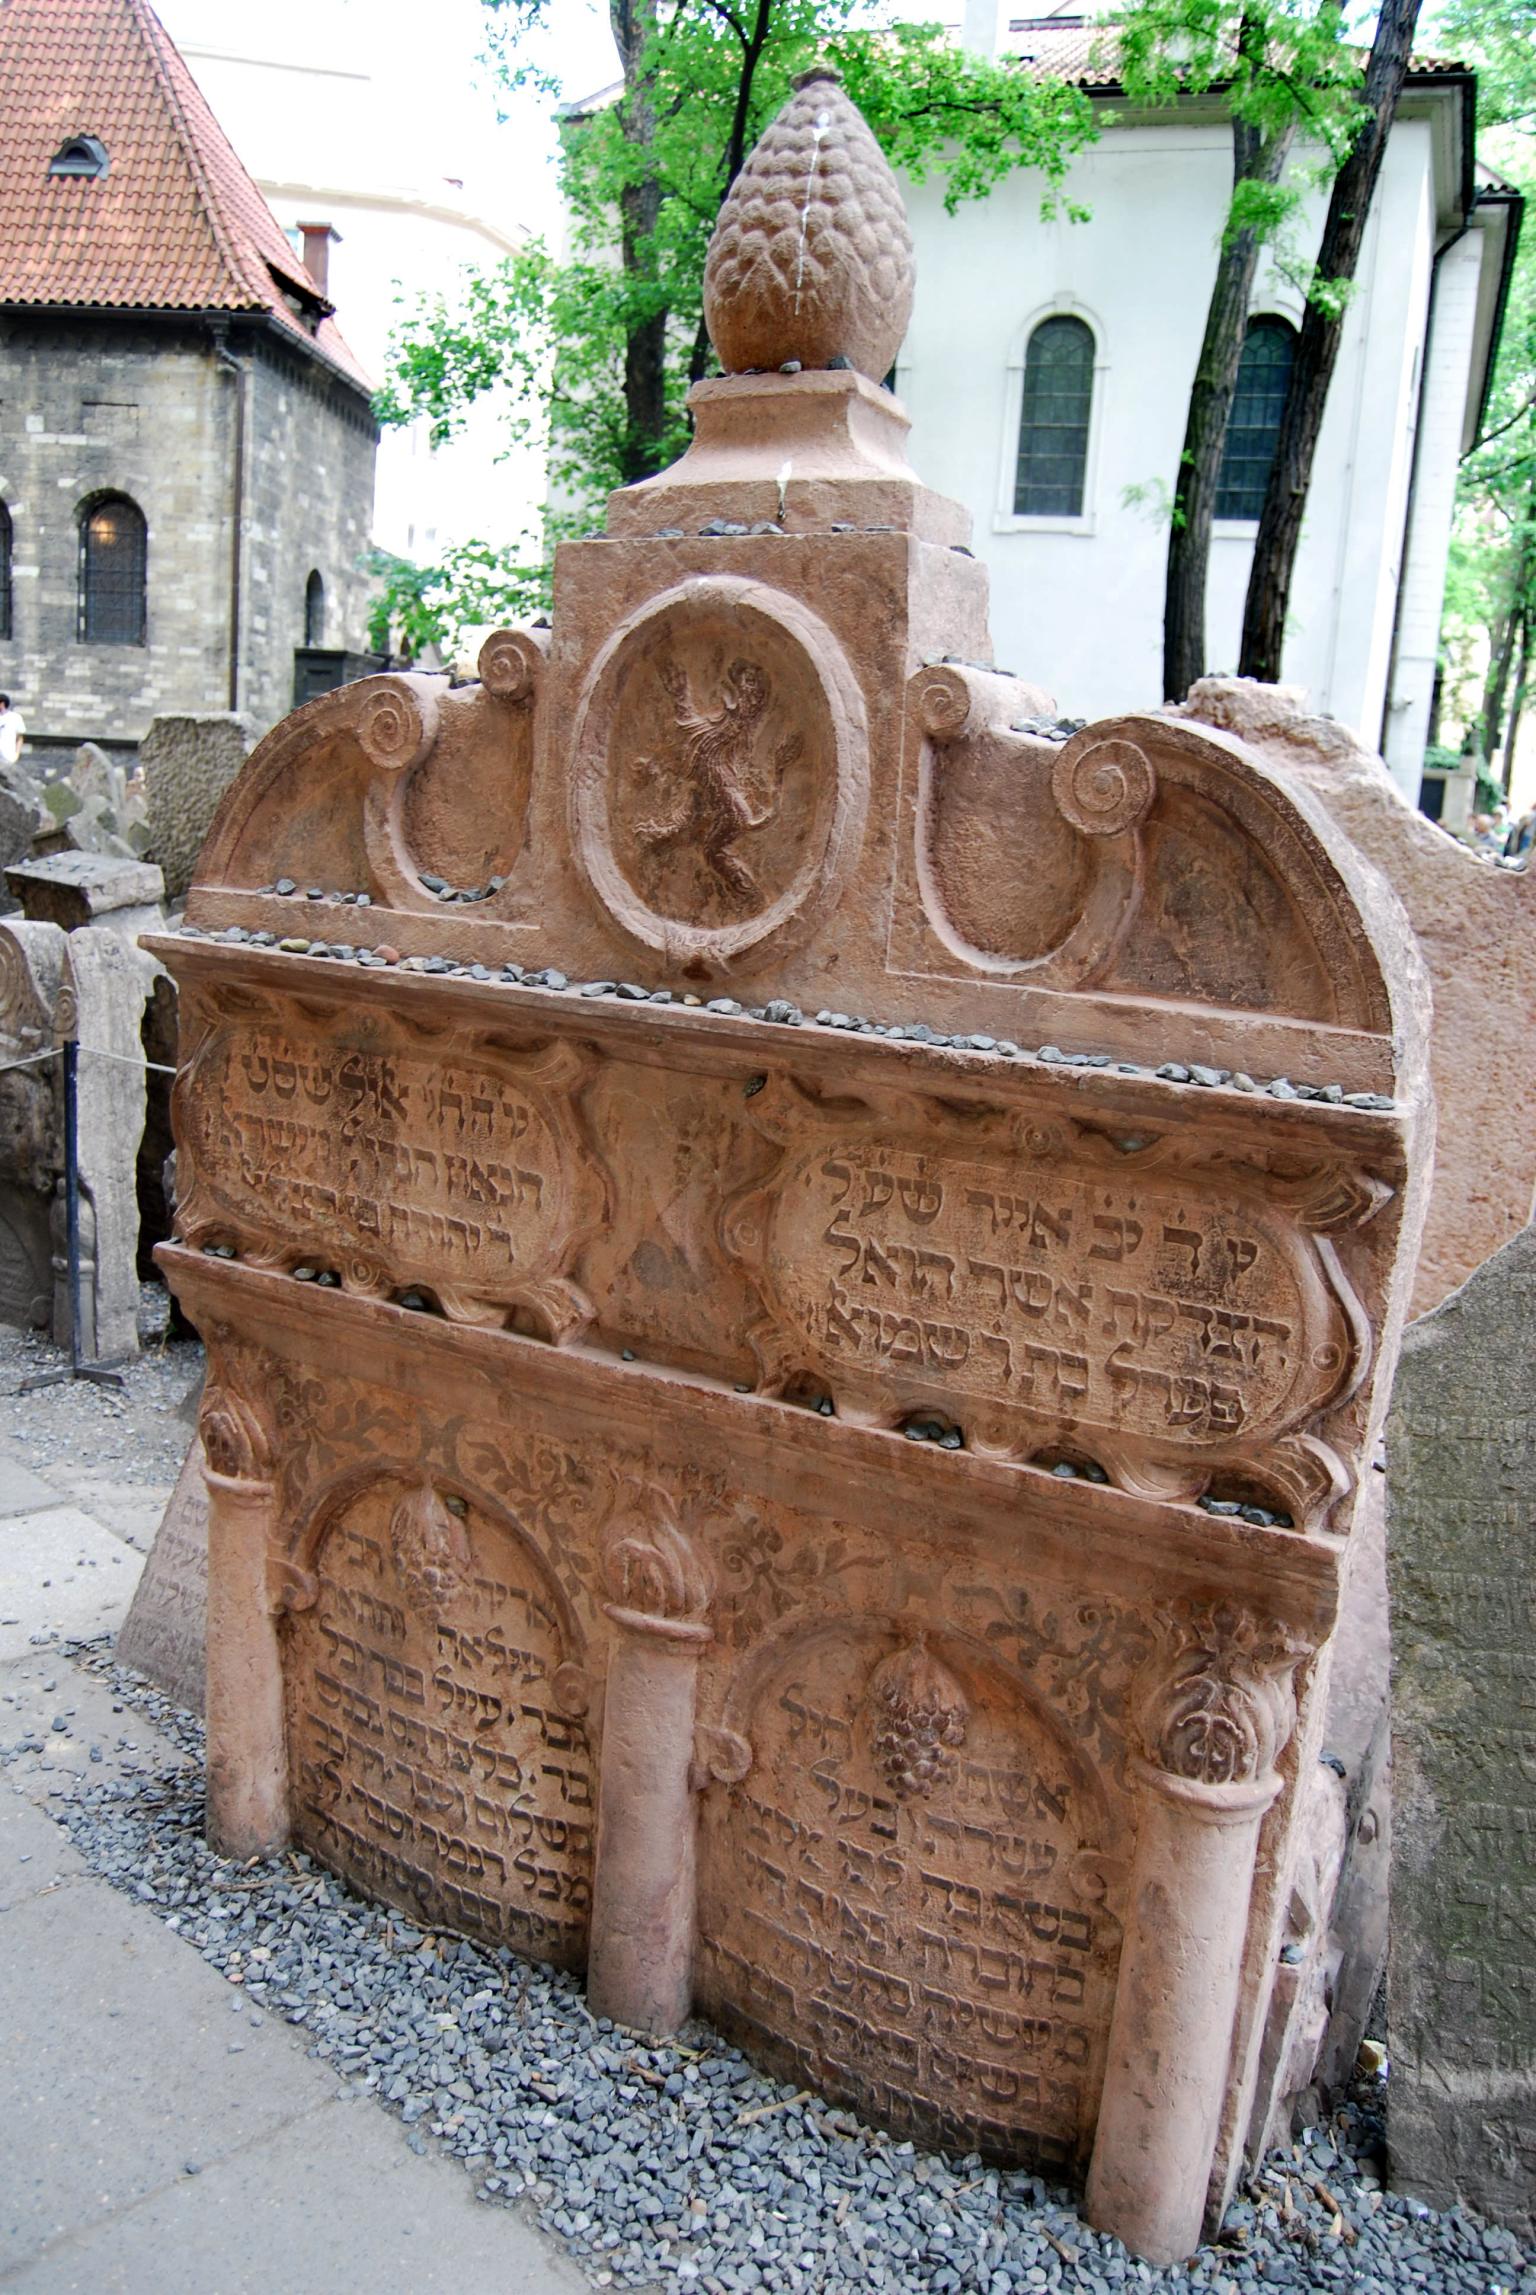 Tombstone of lion emblem and Hebrew inscription.